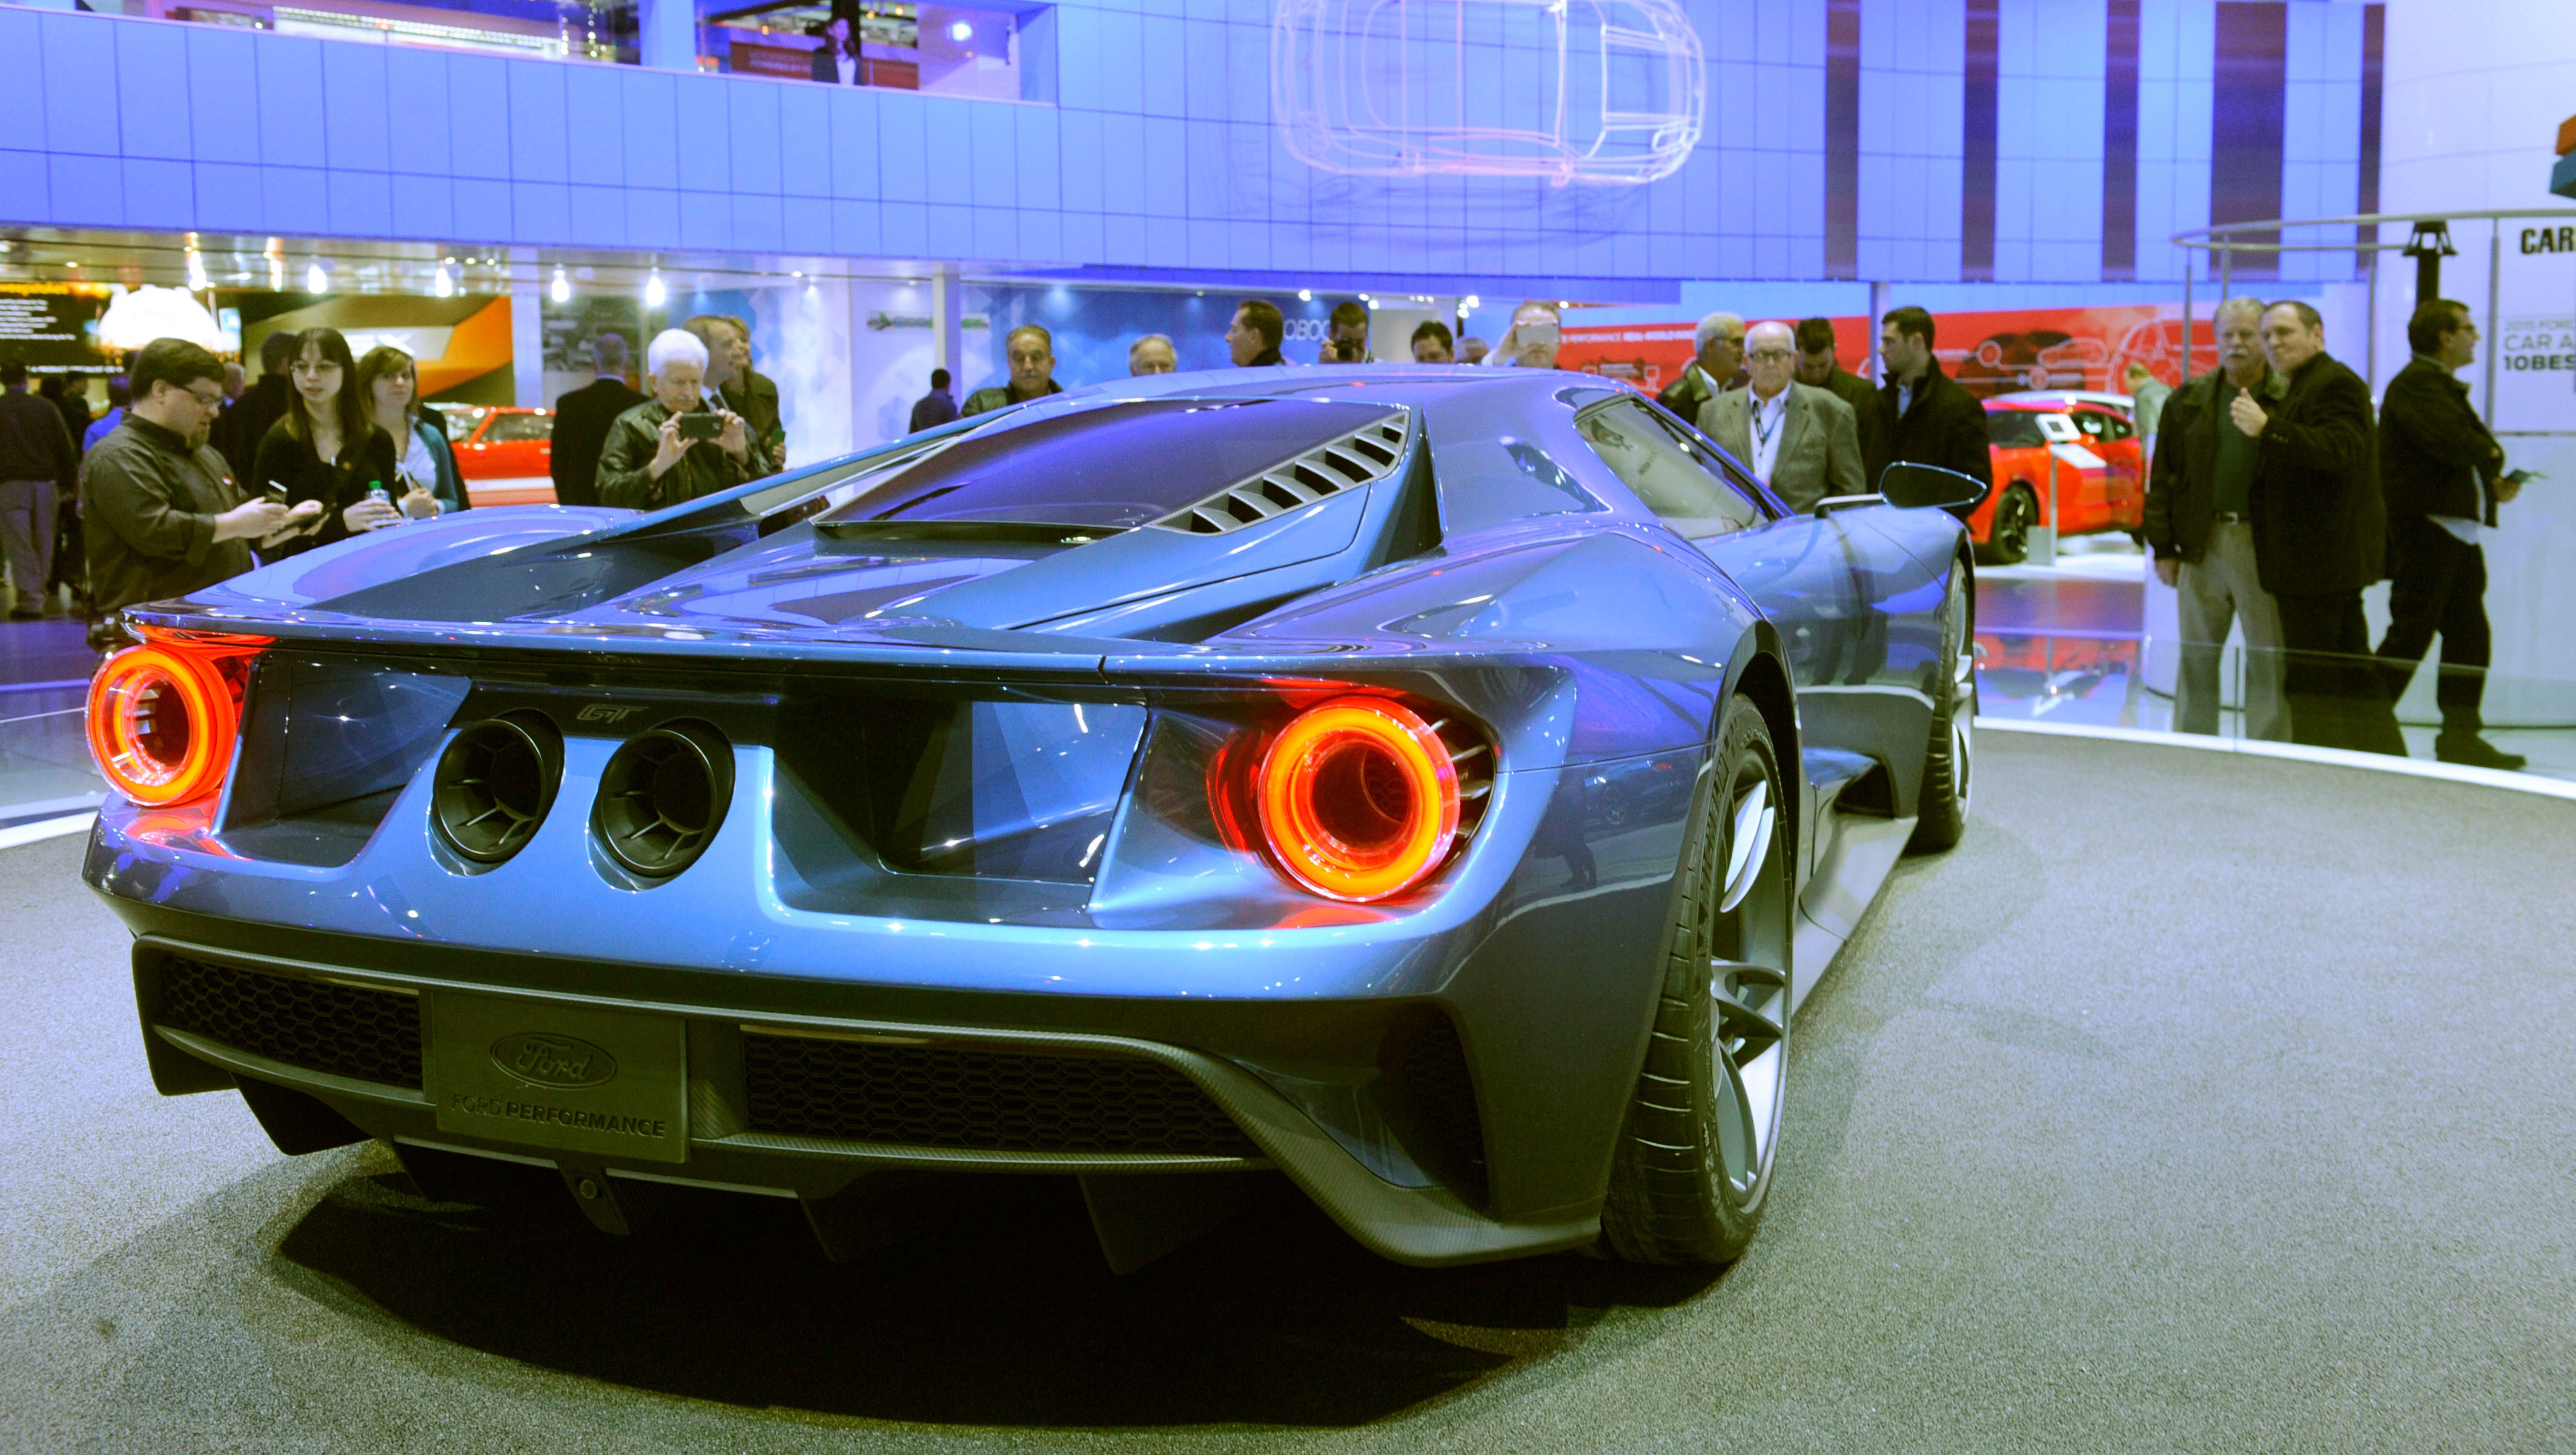 The Ford GT serves as a test bed for technologies, lightweighting techniques and features that could become commonplace on future vehicles throughout Ford's lineup.